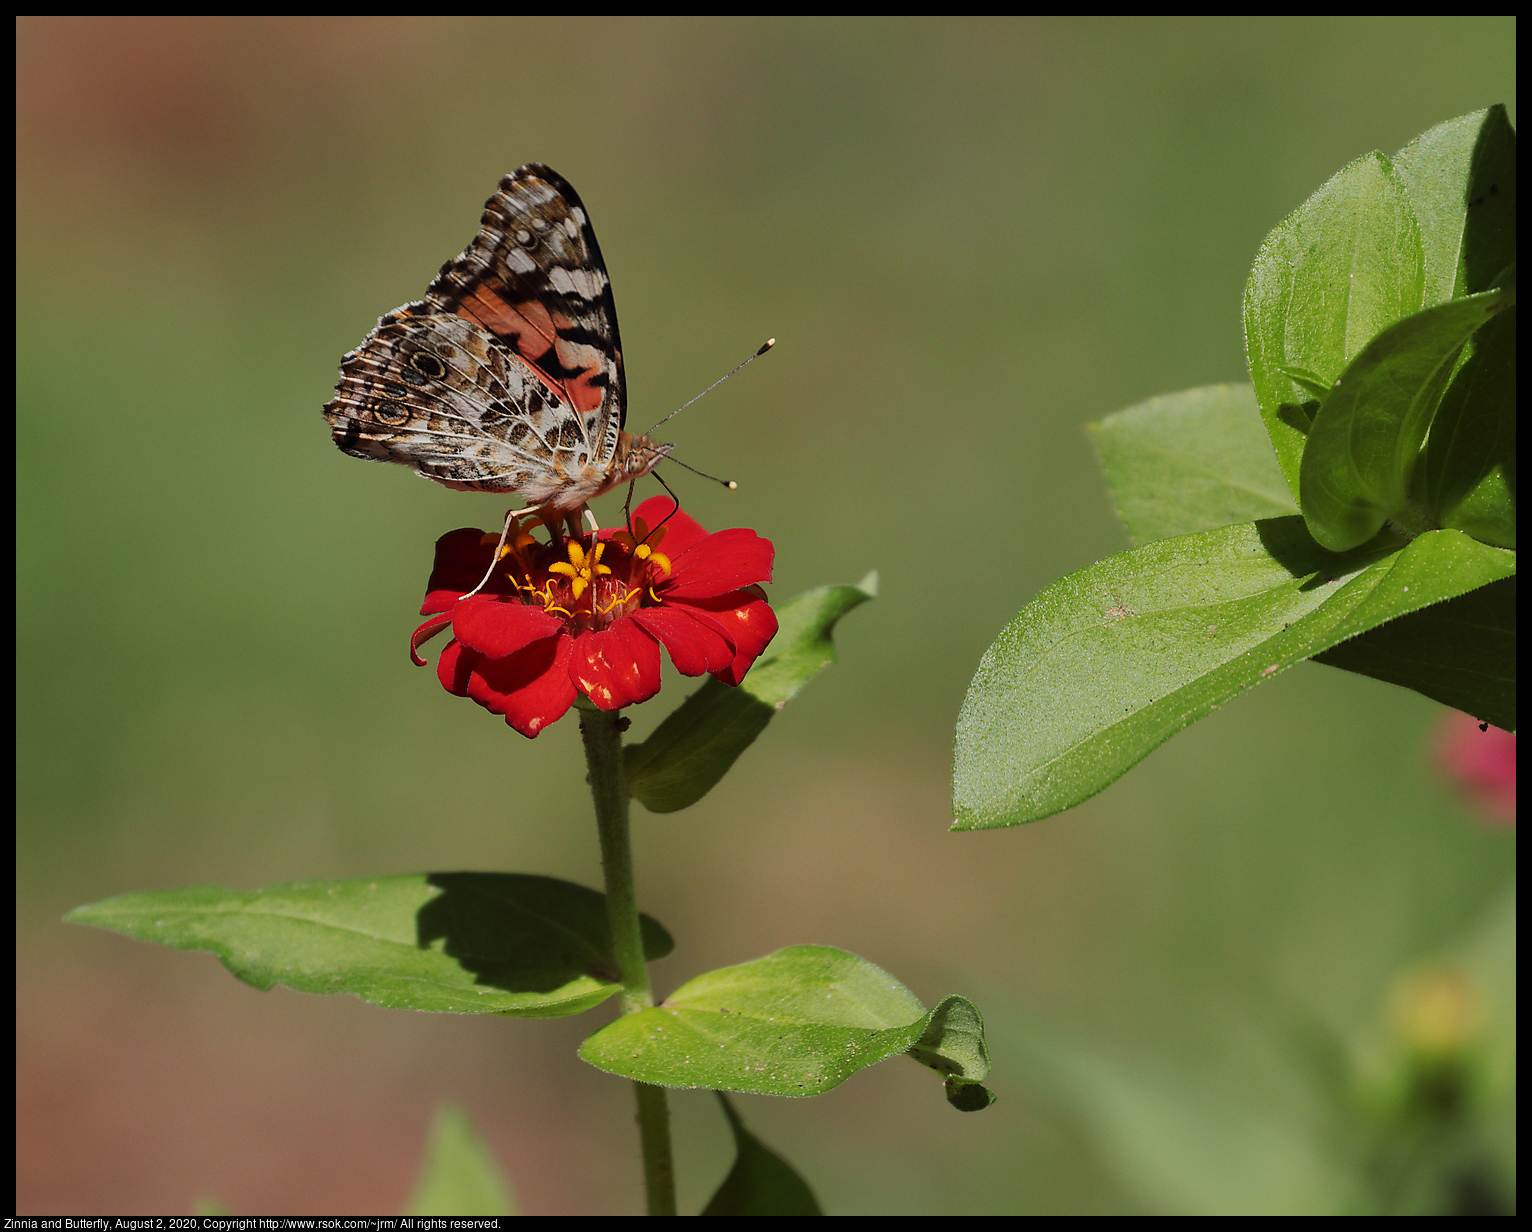 Zinnia and Butterfly, August 2, 2020